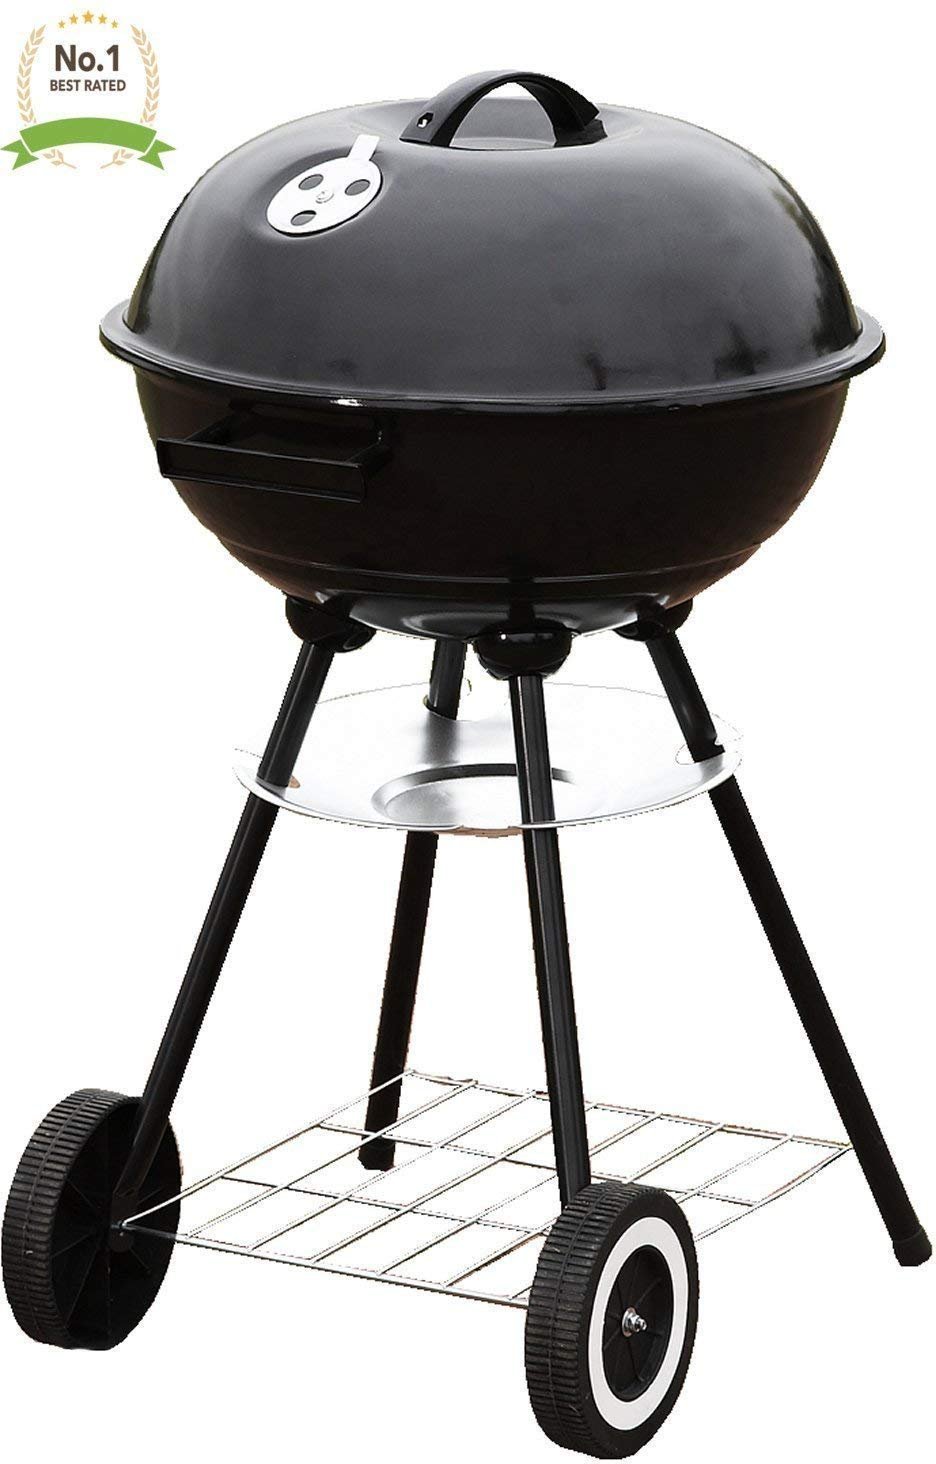 Portable 18" Charcoal Grill Outdoor Original BBQ Grill Backyard Cooking Stainless Steel 18 diameter cooking space cook steaks, burgers, Backyard & Tailgate - image 5 of 5